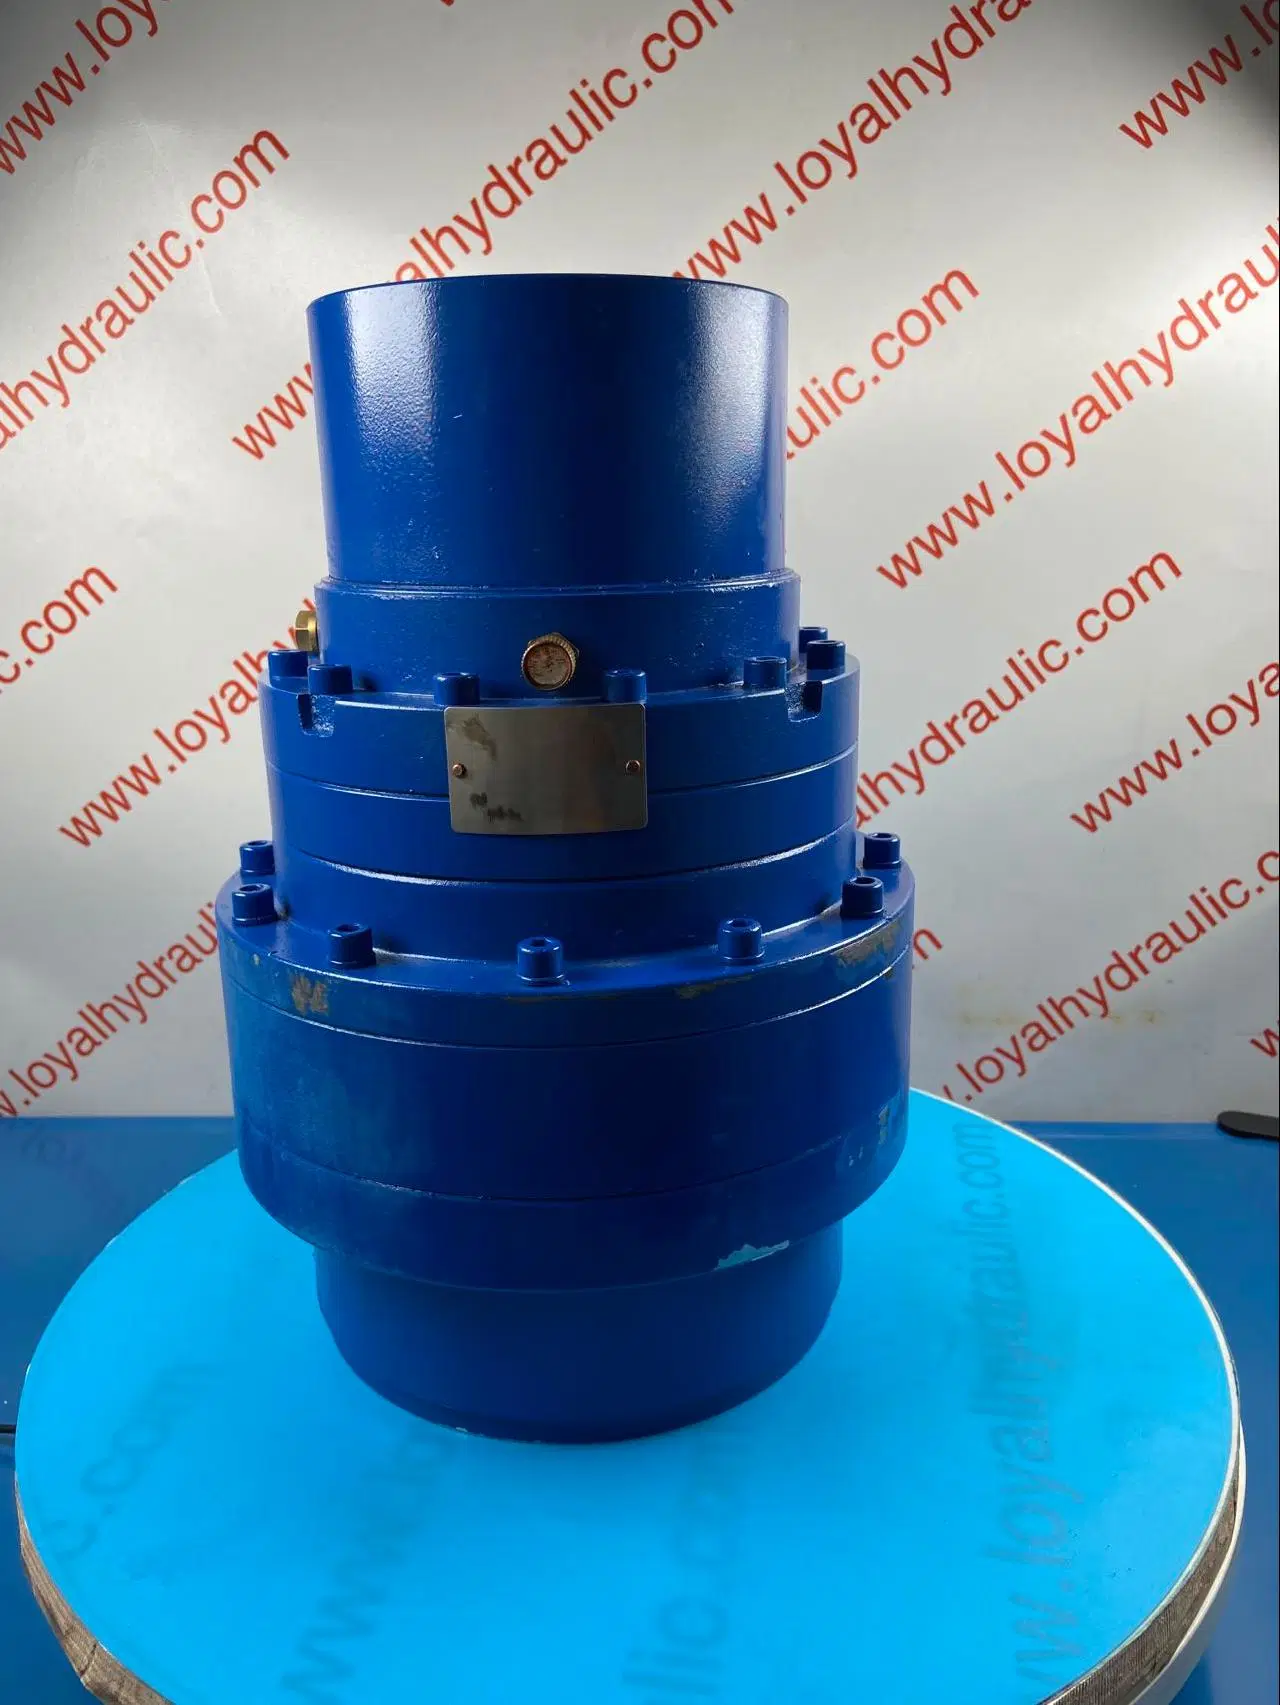 Speed Reducer EQ 4255, Ec 3255, Ec 4255 Series Gearbox for Construction Machinery, Tractor, Hydraulic System